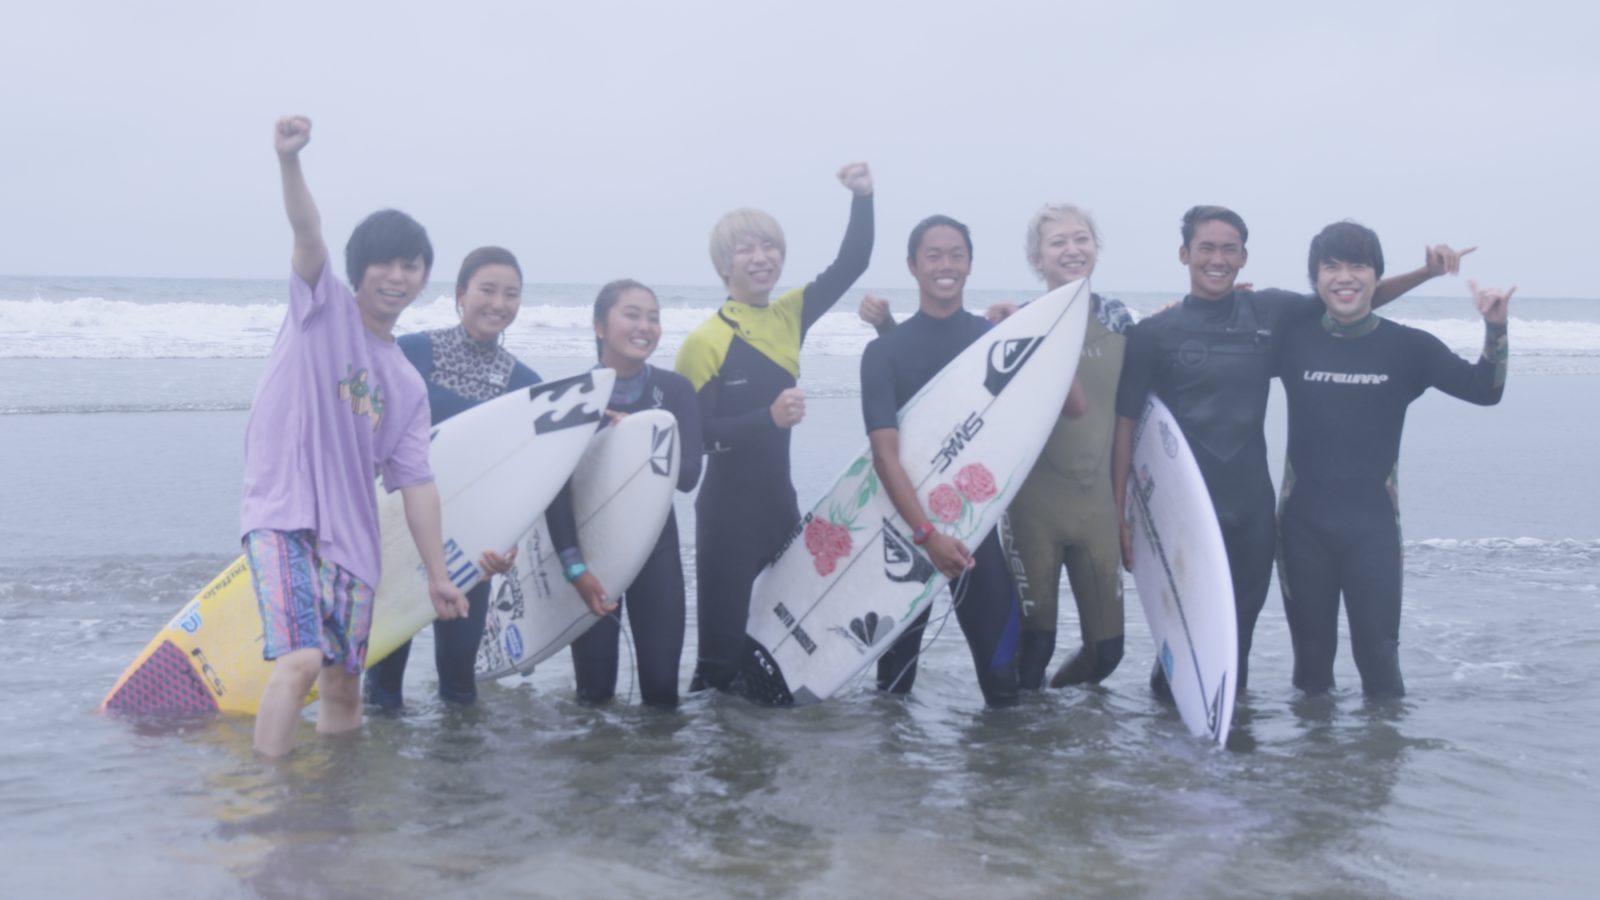 KEYTALK、新曲「Catch The Wave」が『meets the surf project』のタイアップソングに決定